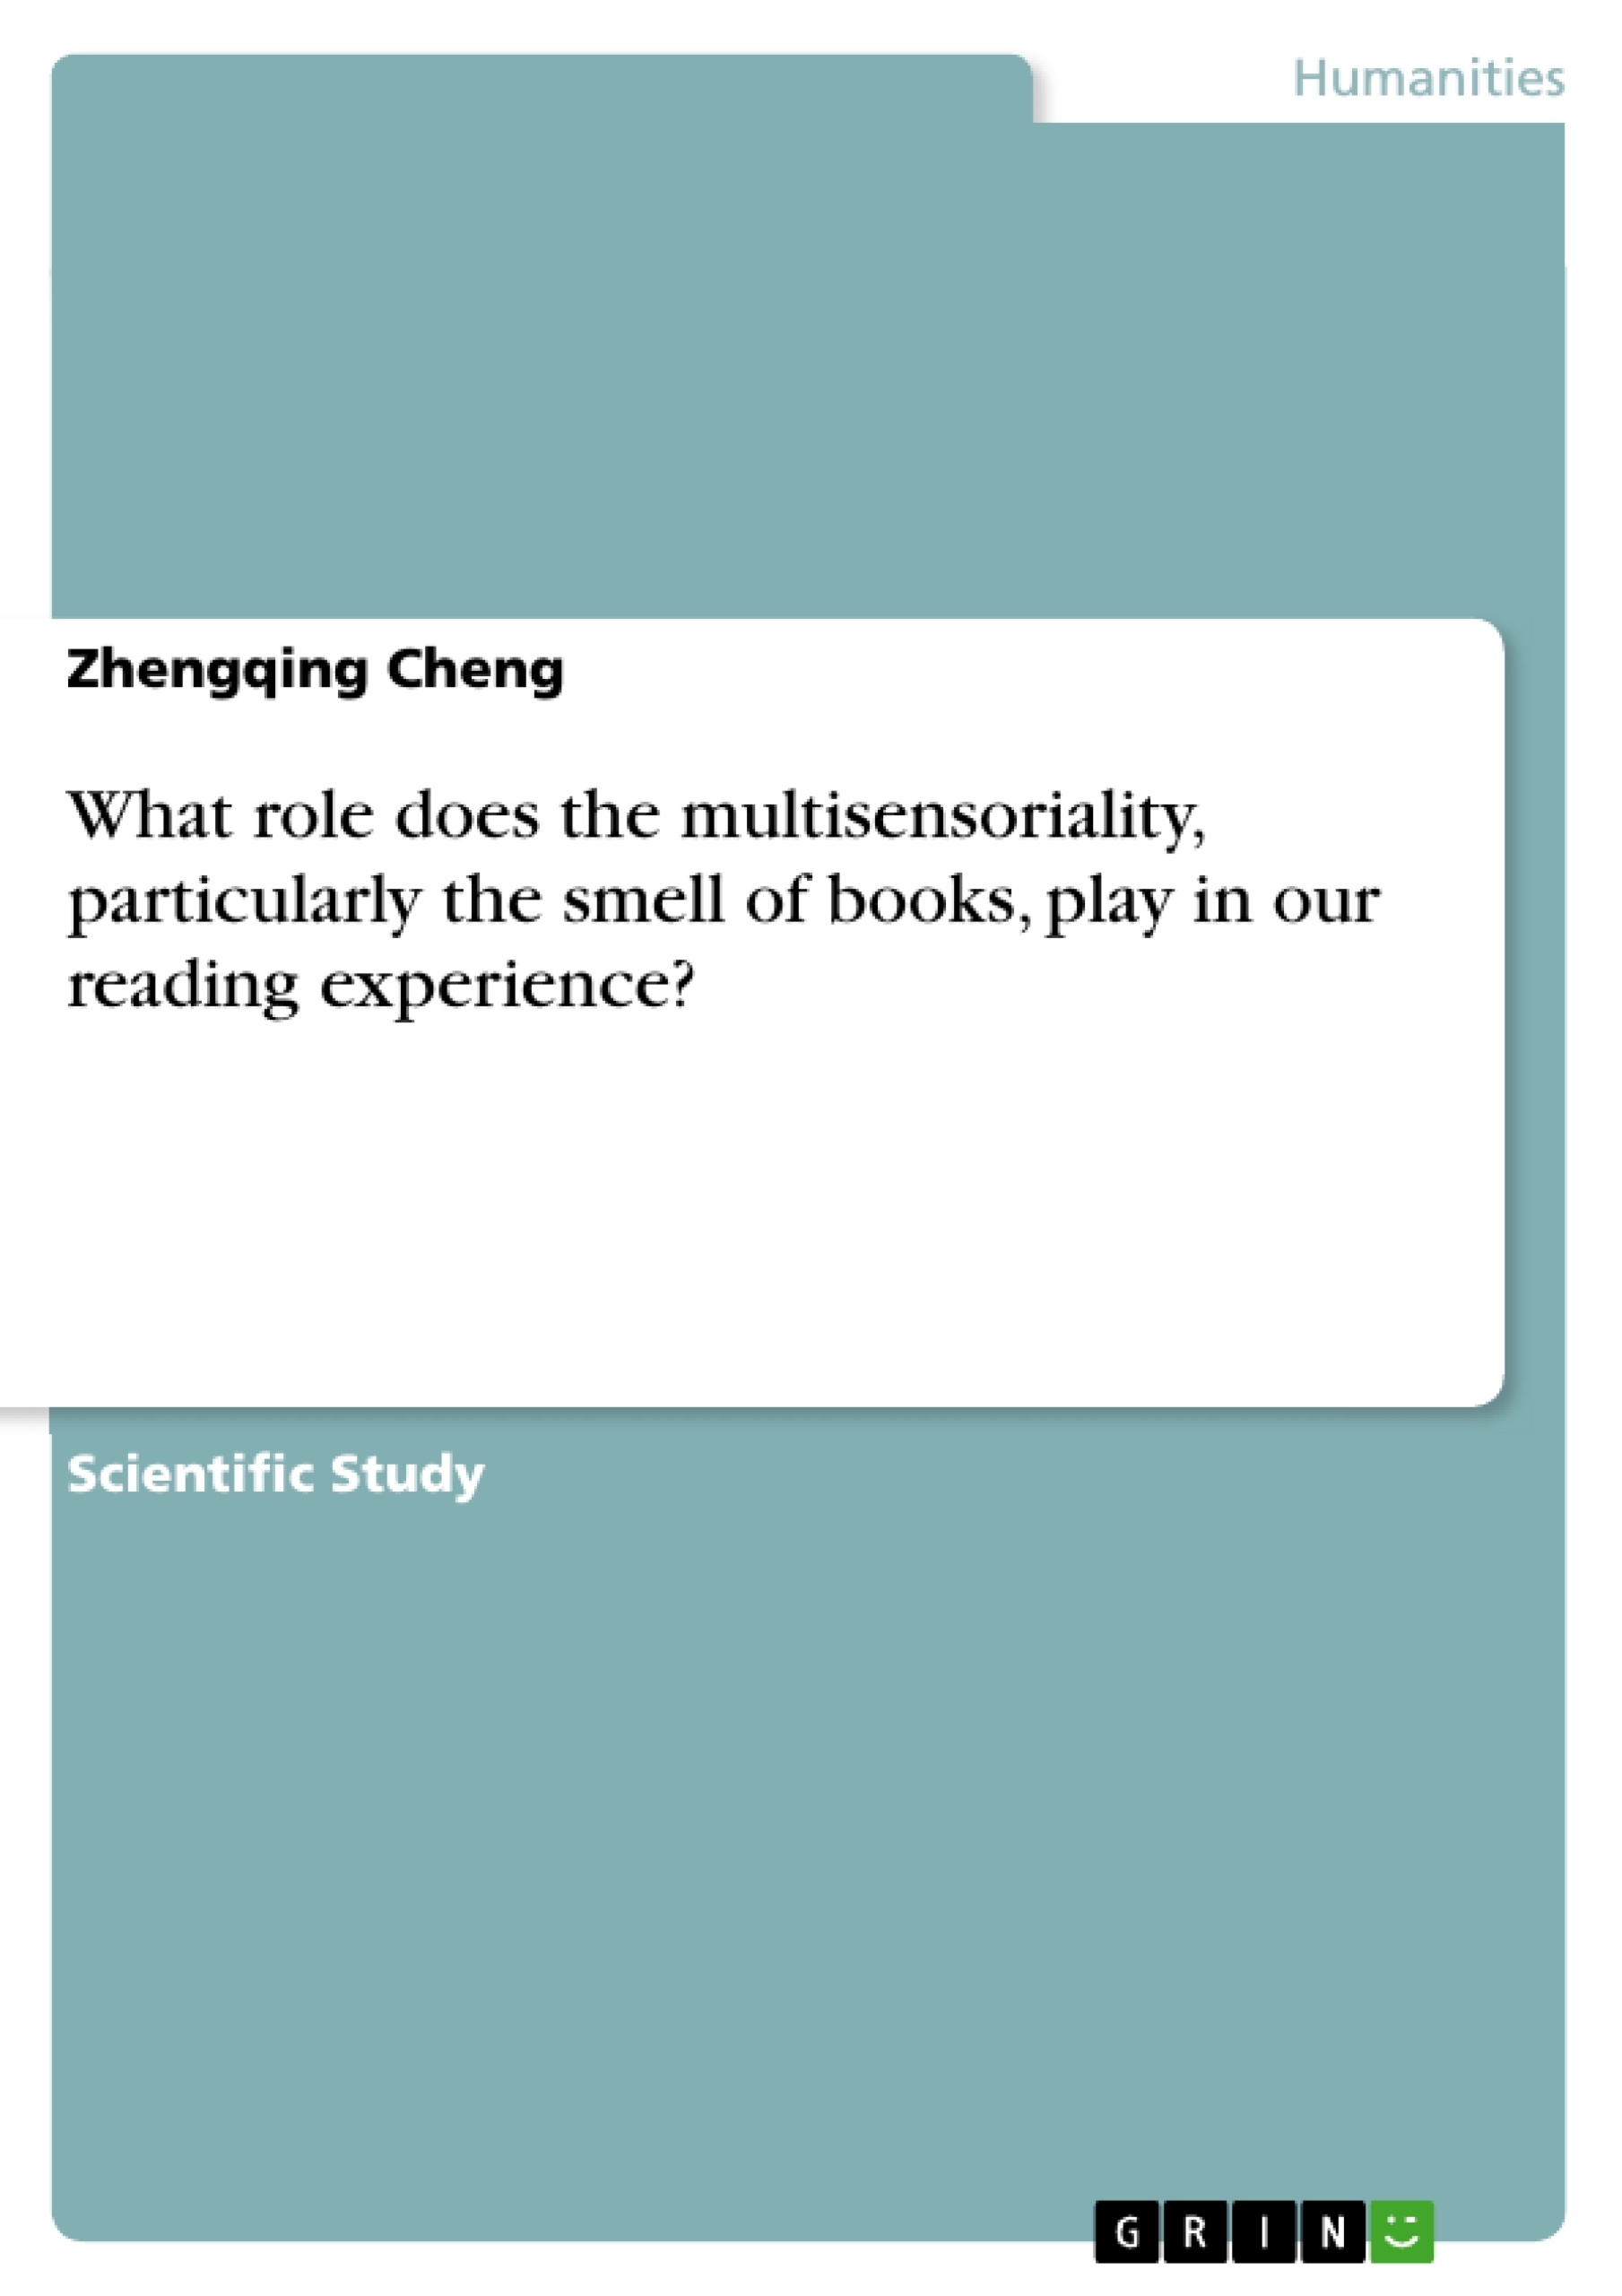 Titre: What role does the multisensoriality, particularly the smell of books,  play in our reading experience?